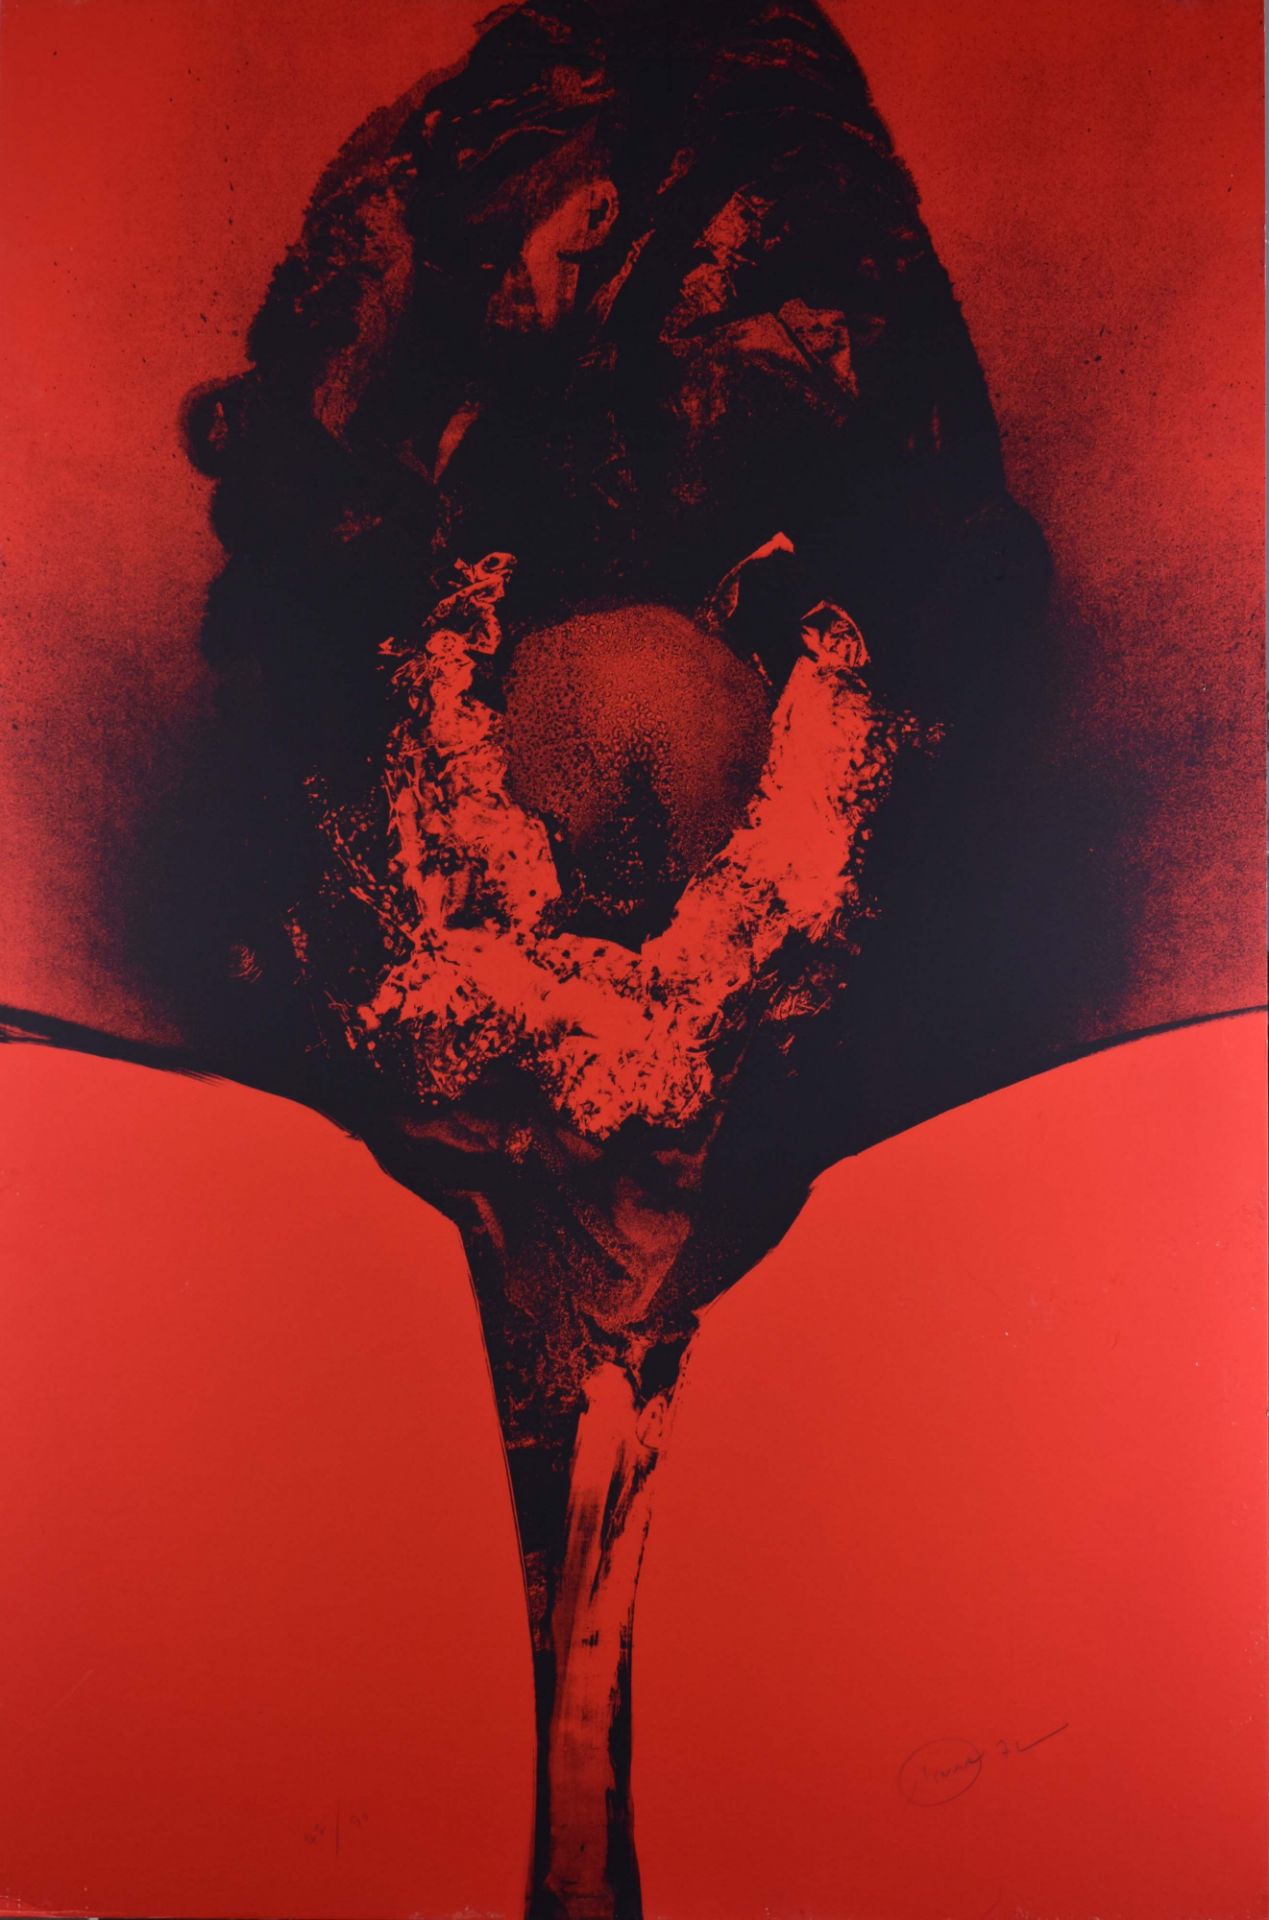 Otto PIENE (1928-2014)"Addis Ababa"graphic - screen printing variant red, dimensions: 146.5 x 97